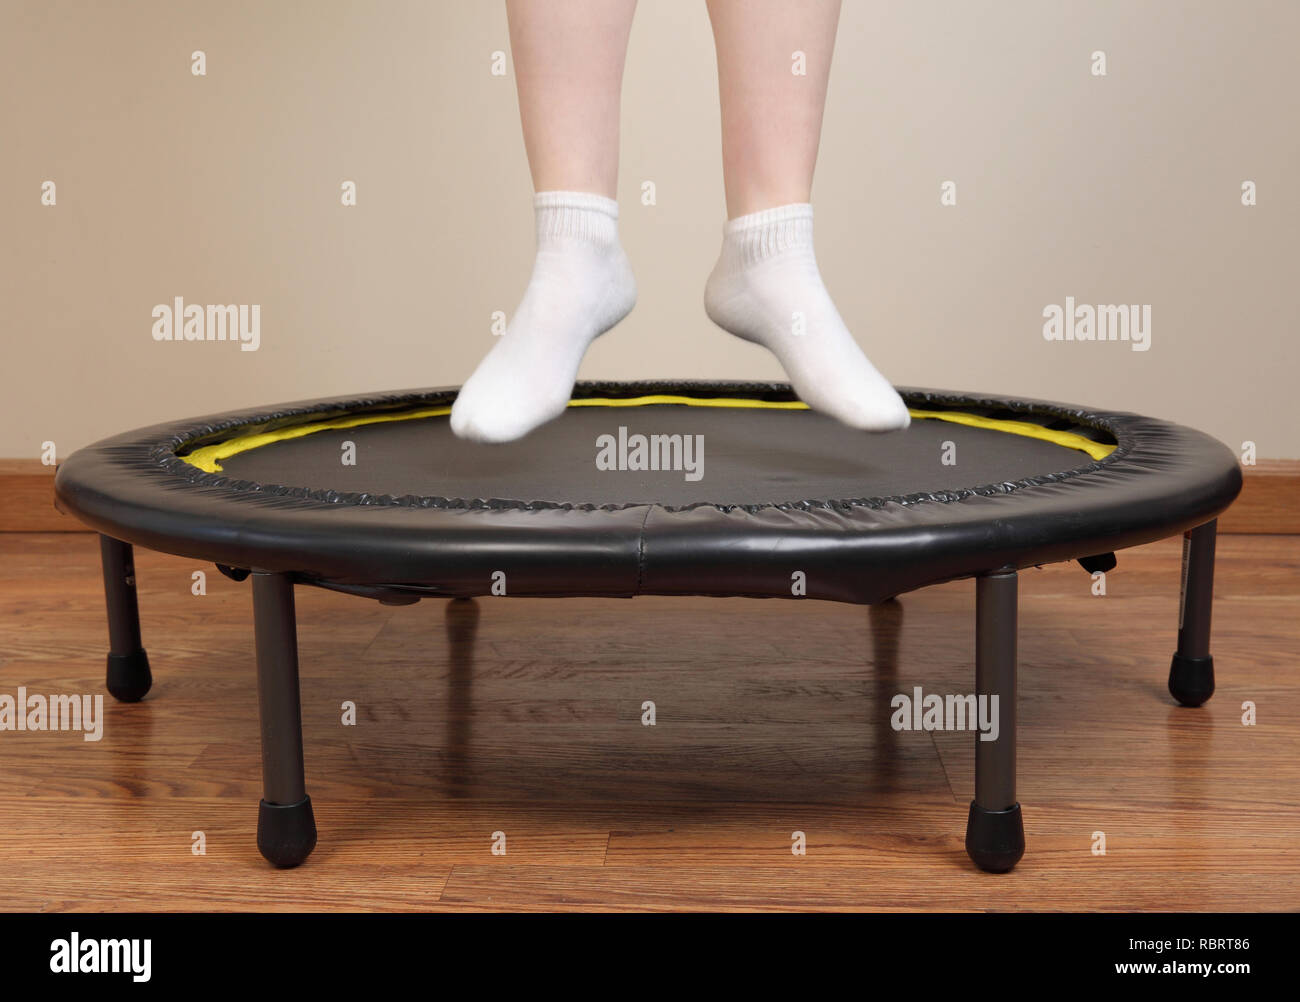 woman jumping on small trampoline showing feet and lower legs only Stock Photo